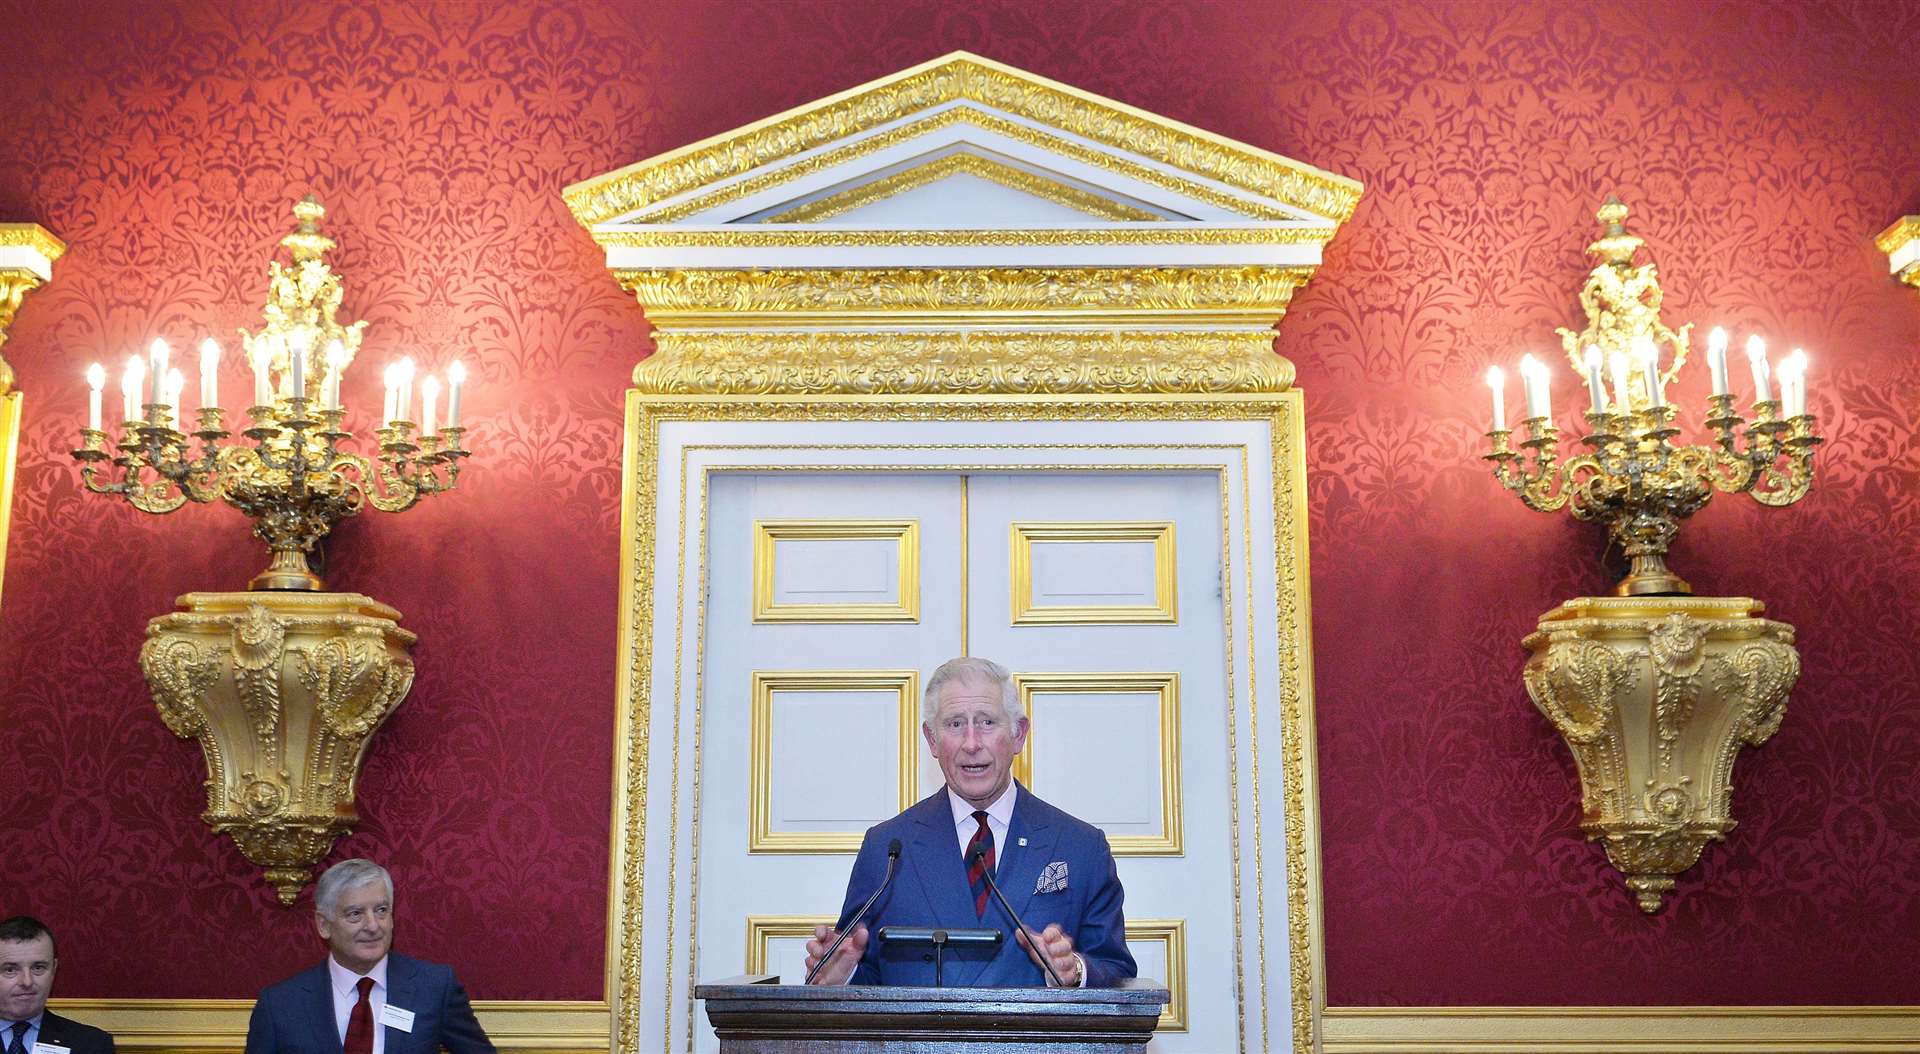 The Prince of Wales speaking at a reception in St James’s Palace in 2017 (John Stillwell/PA)